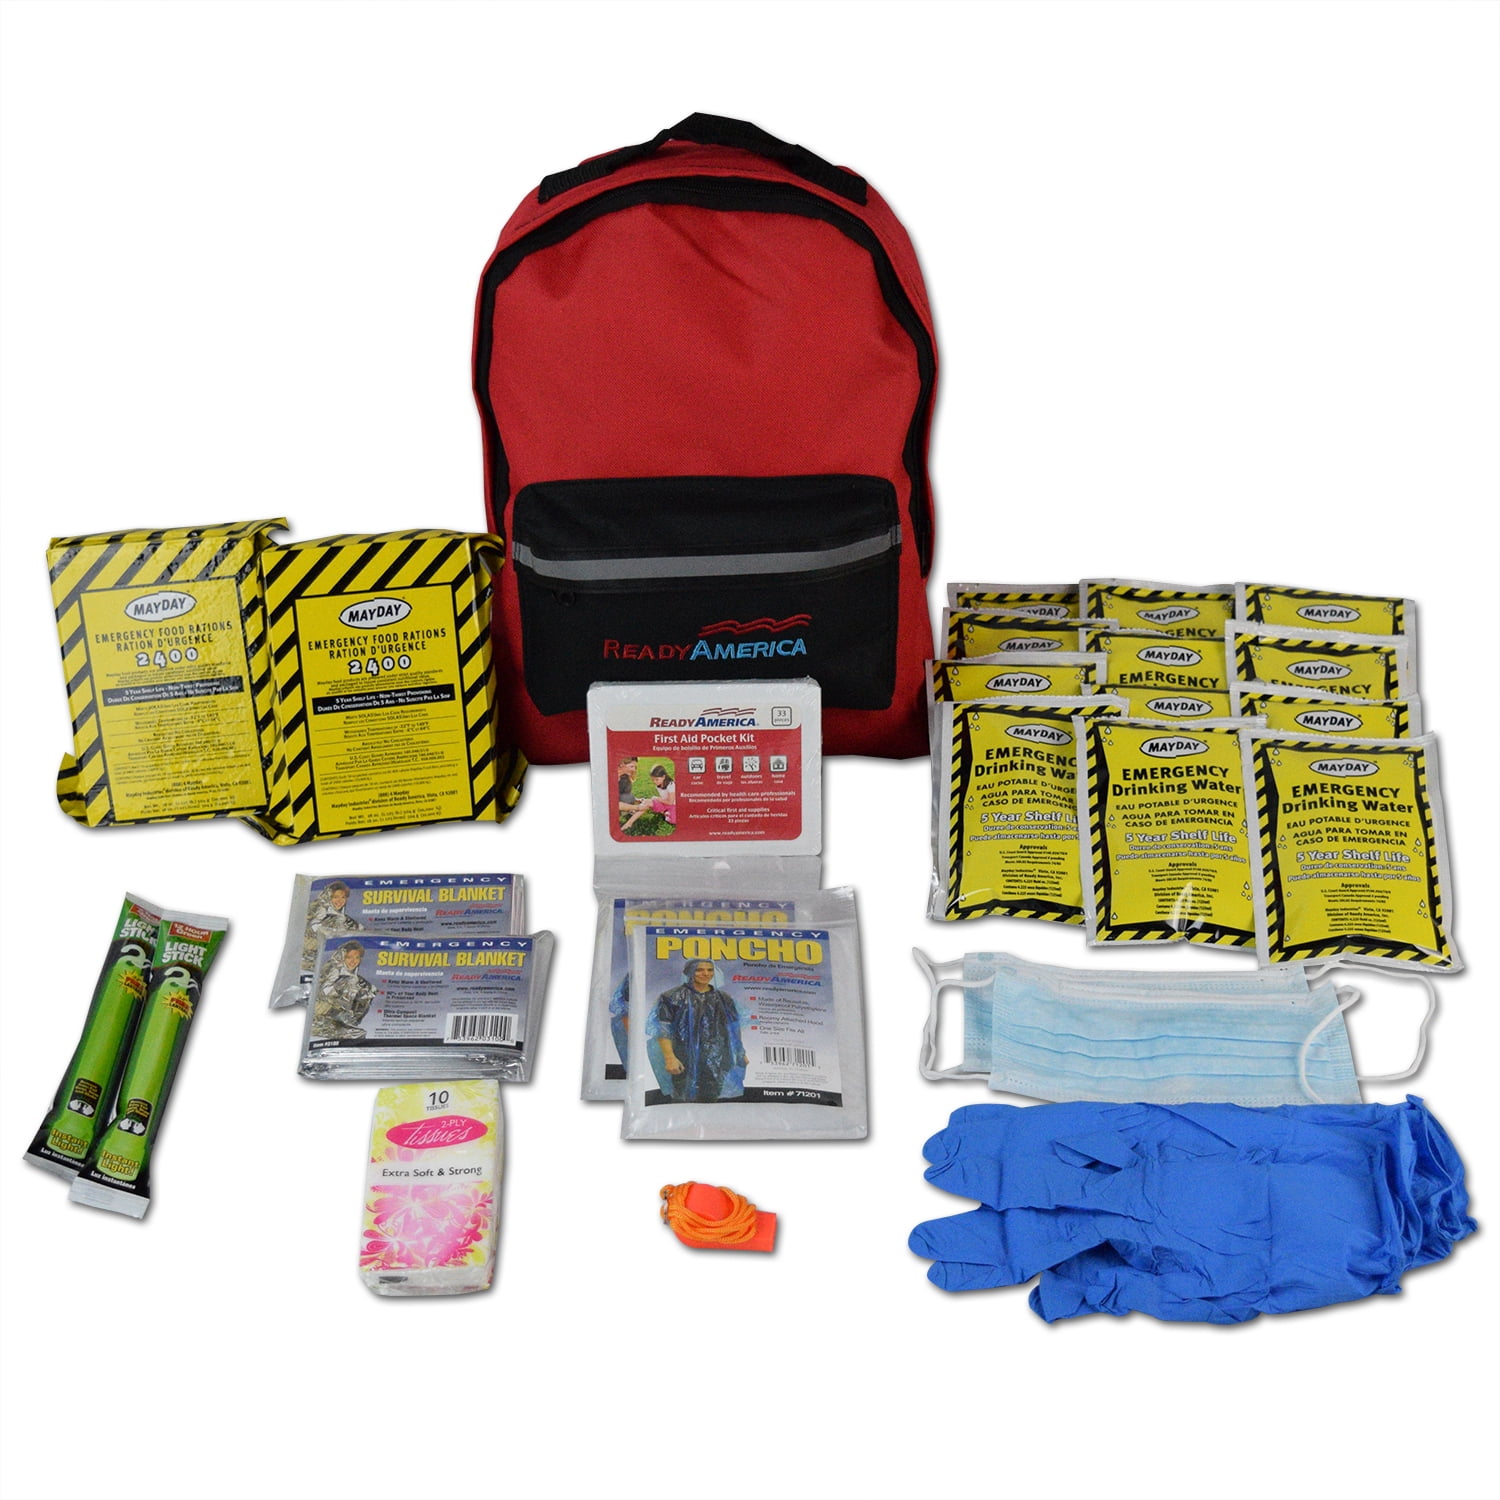 What to pack in a First Aid Kit/Emergency Kit - Take a Hike!